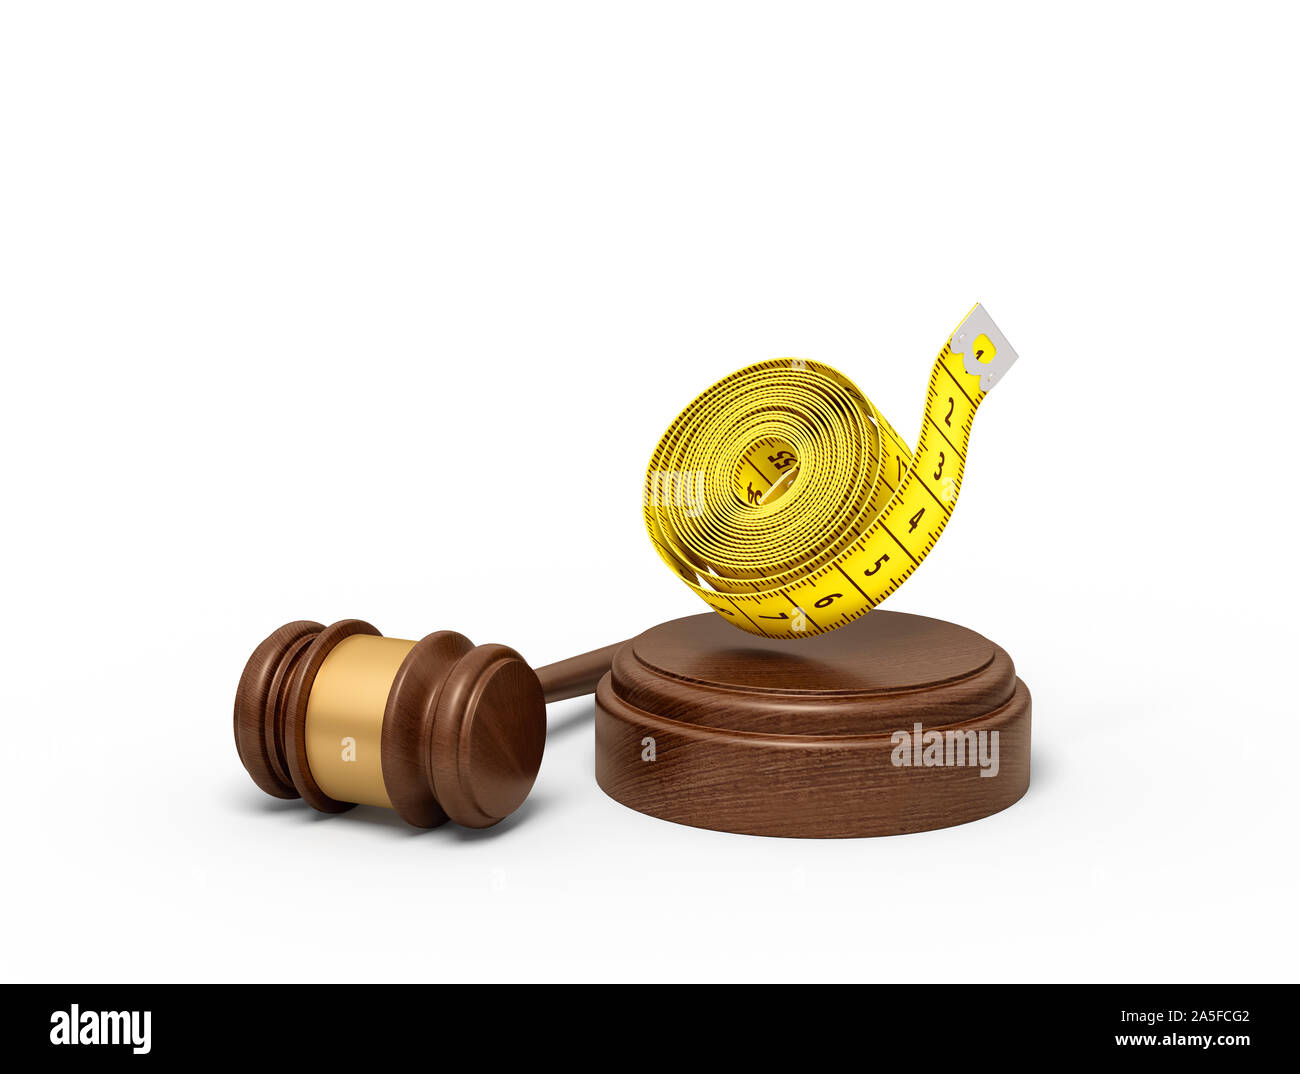 3d rendering of roll of yellow measuring tape levitating in air above sounding block with gavel beside. Stock Photo